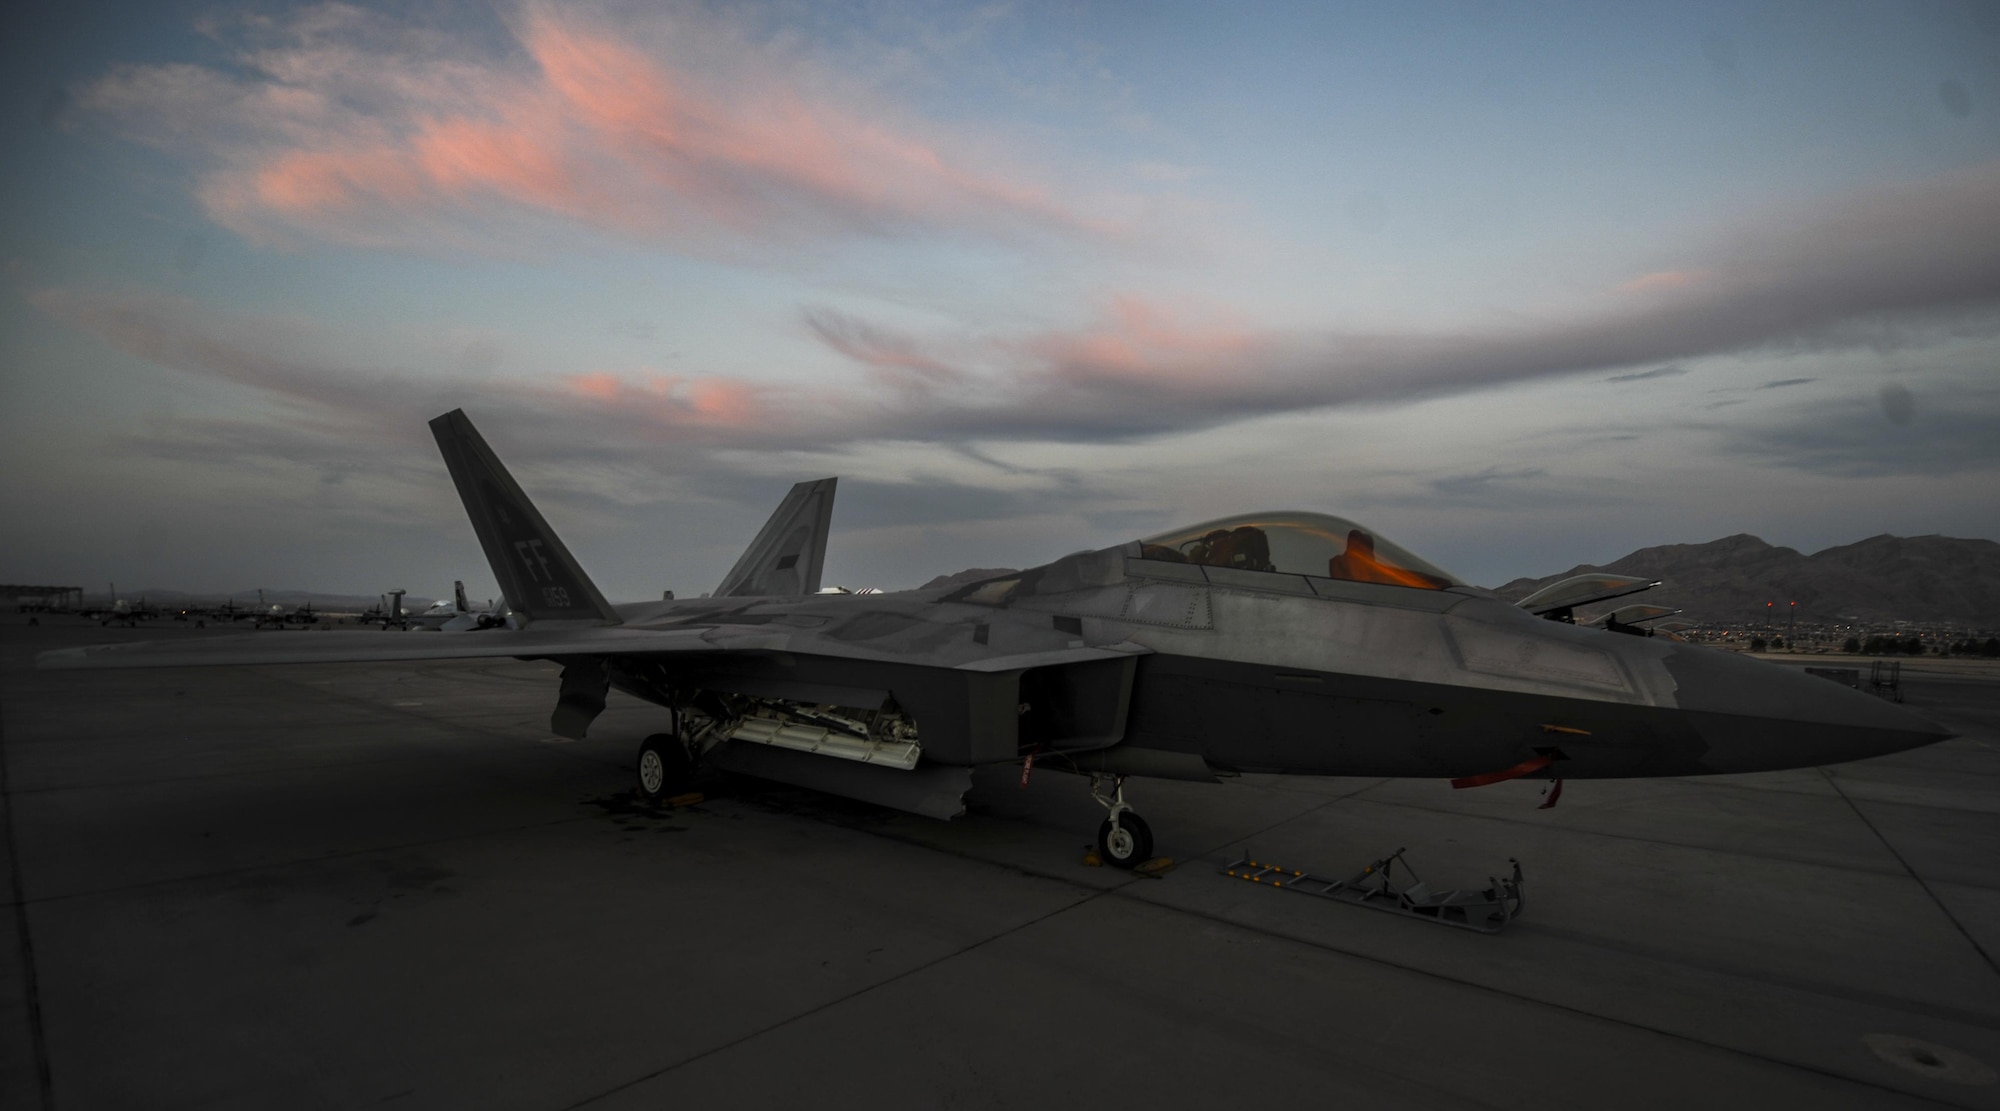 An F-22A Raptor, assigned to the 27th Fighter Squadron, Joint Base Langley-Eustis, Va., sits on the runway during Red Flag 16-3 at Nellis Air Force Base, July 25, 2016. Red Flag is a realistic combat exercise involving multiple military branches conducting training operations on the 15,000 square mile Nevada Test and Training Range. (U.S. Air Force photo by Airman 1st Class Kevin Tanenbaum/Released)